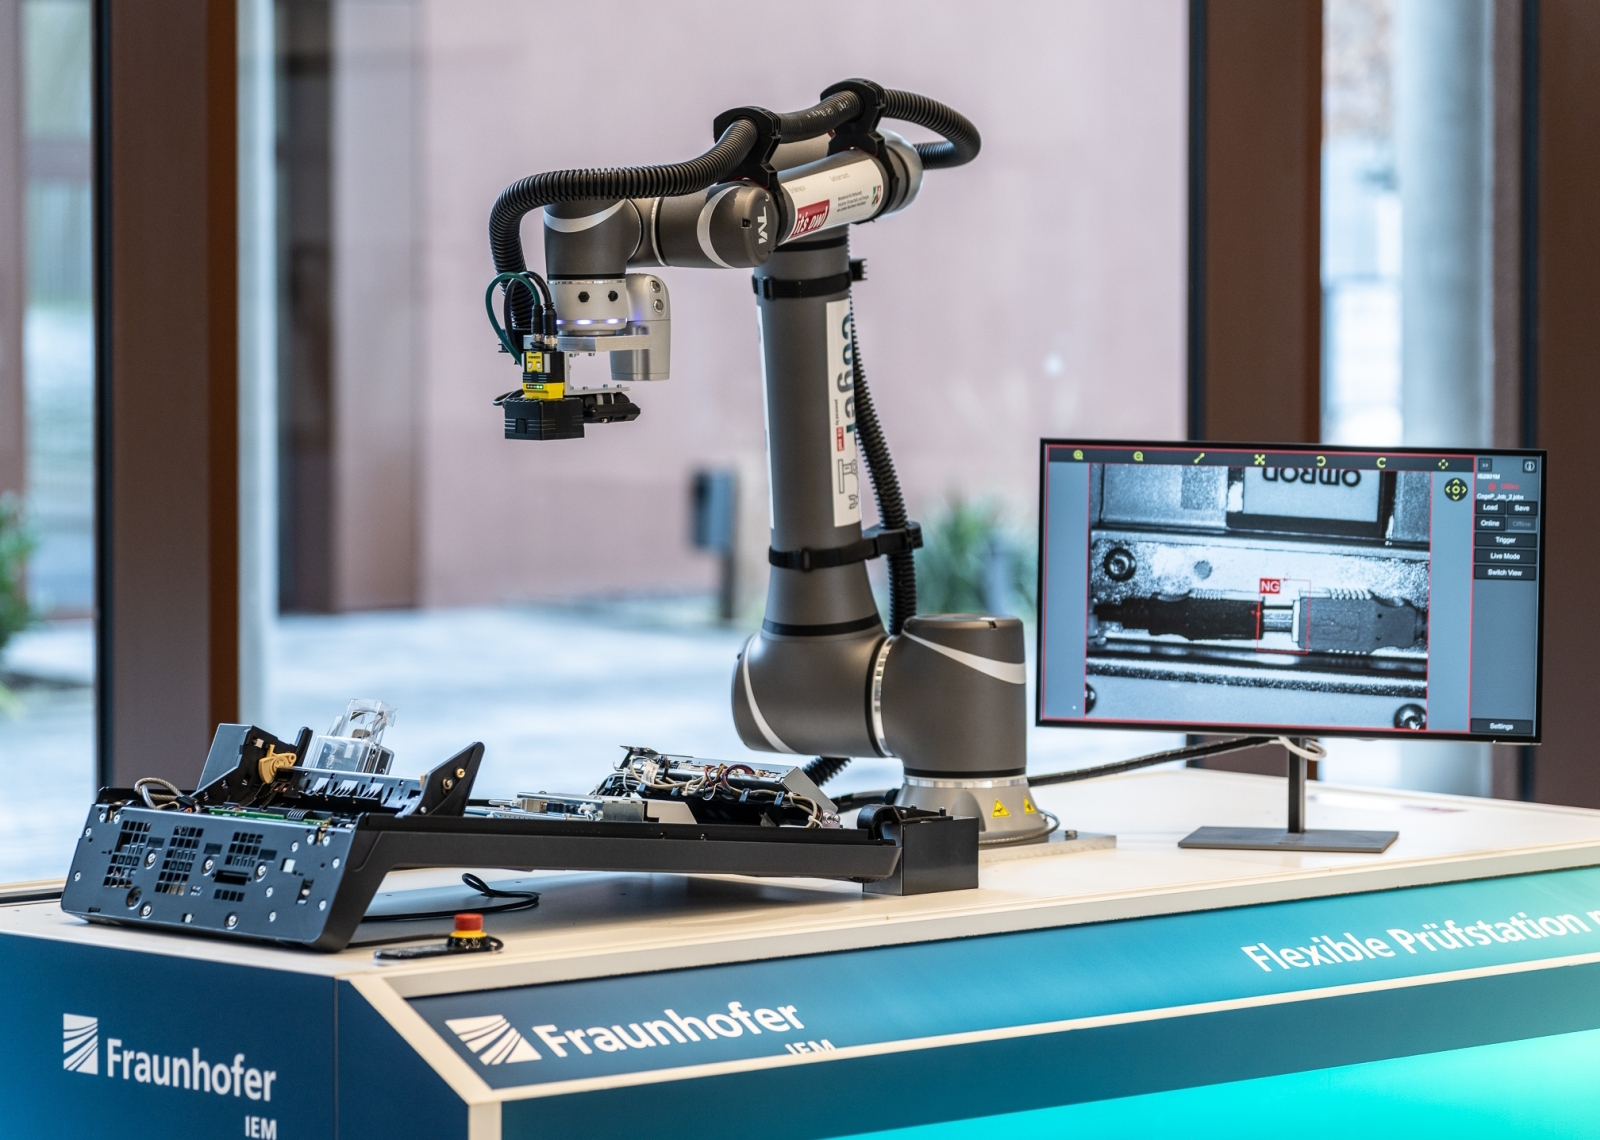 Fraunhofer's latest cobot inspection system identifies part problems, allowing workers to focus on fixing them instead of hunting for quality issues